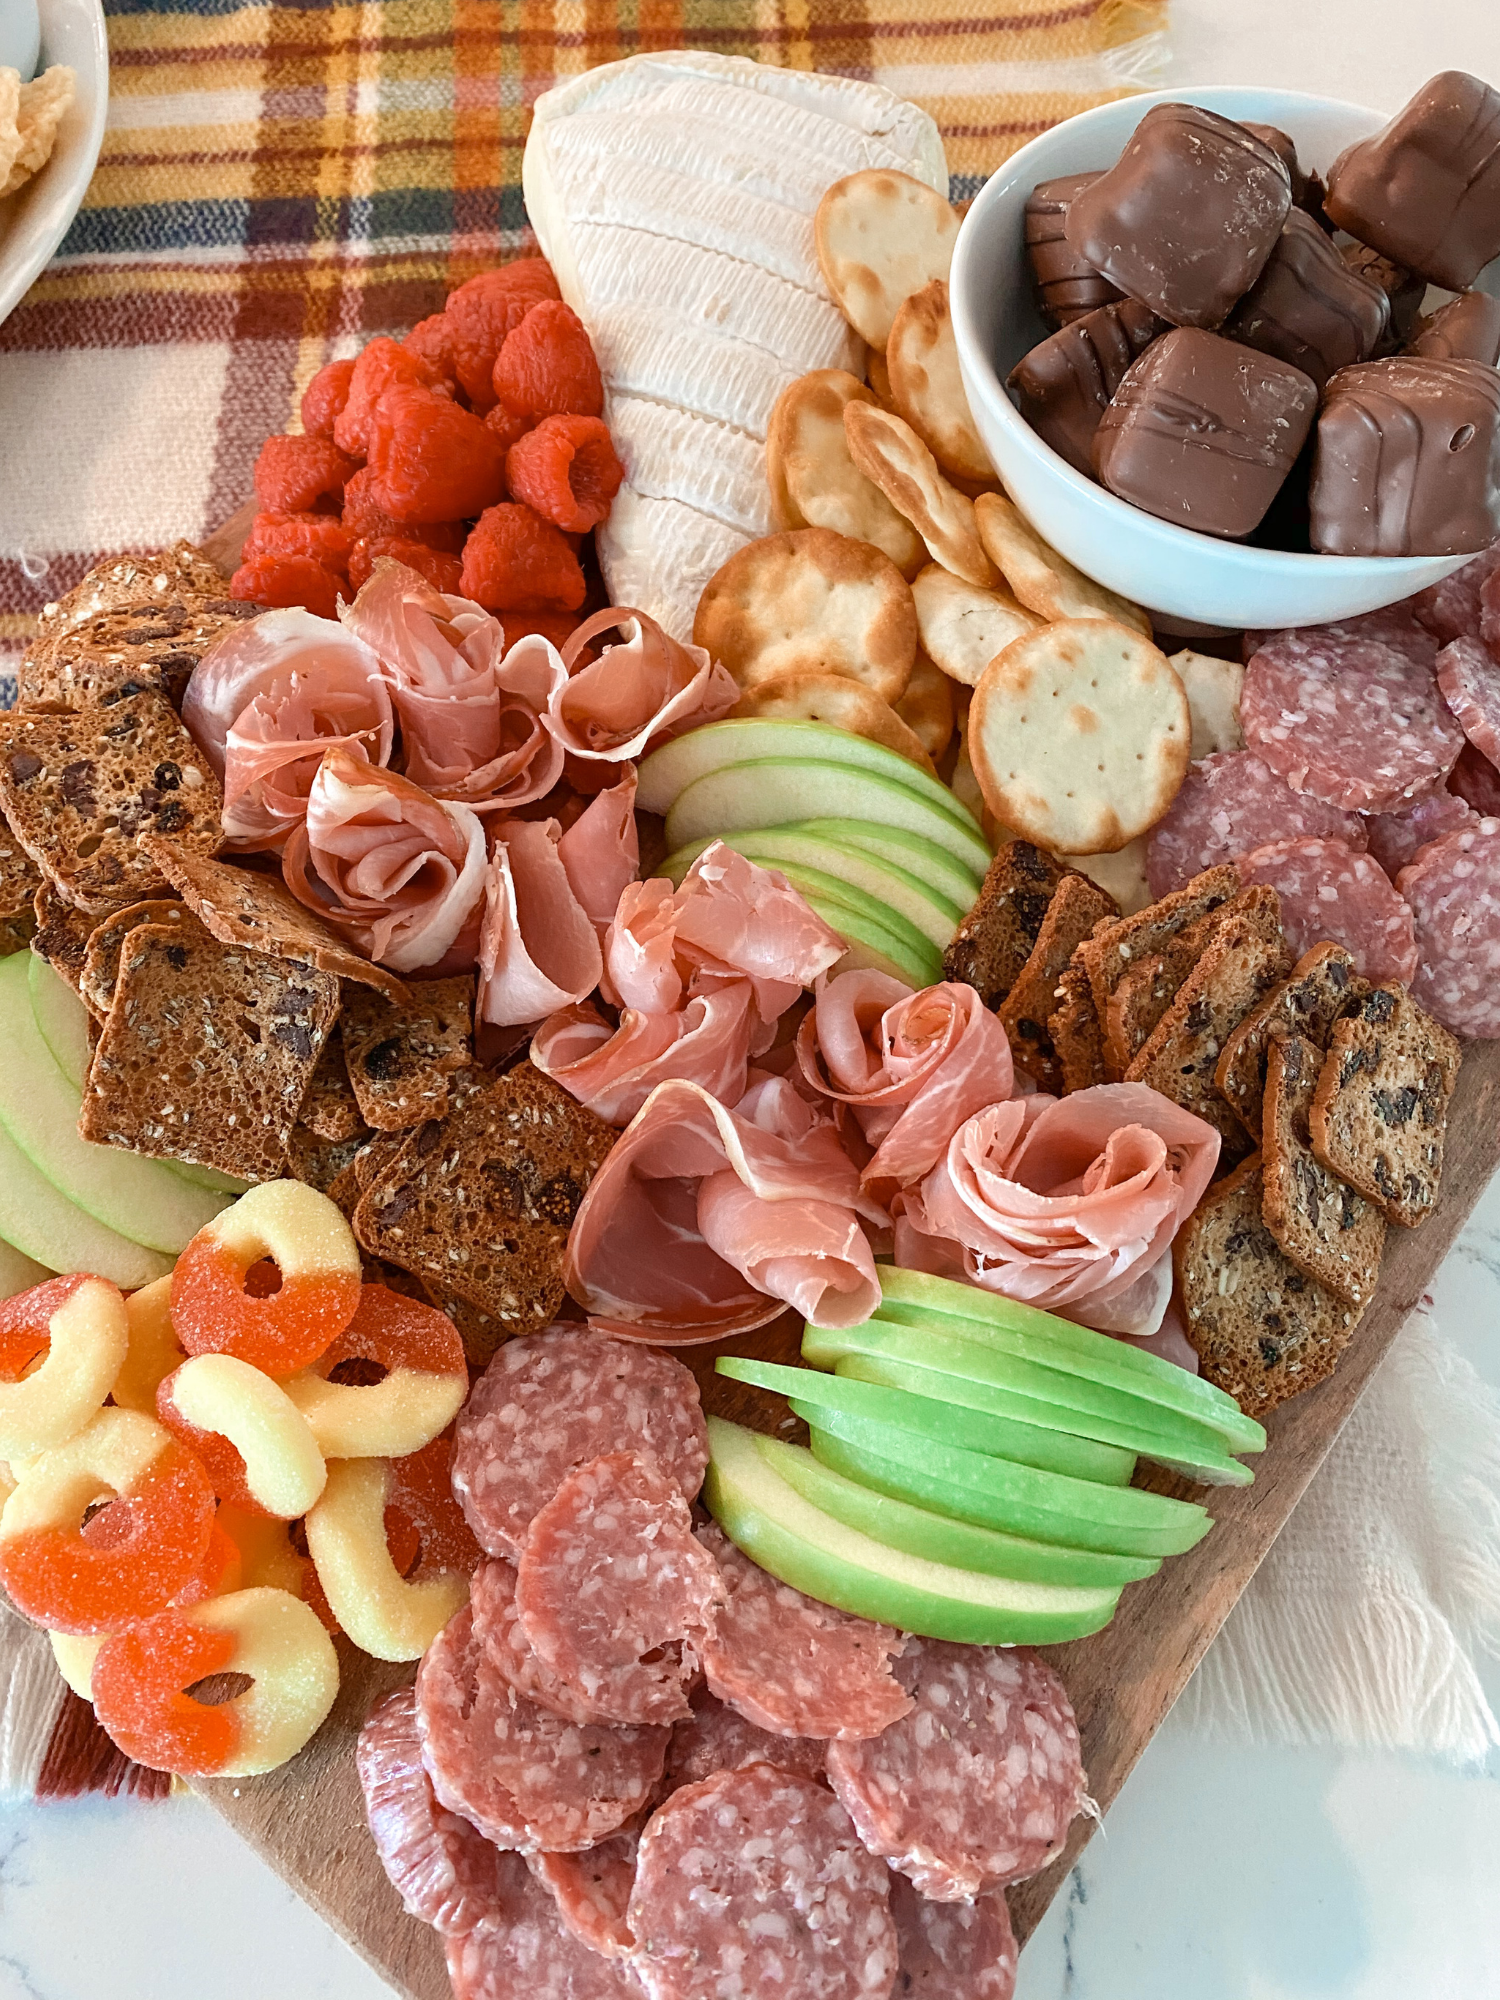 How to Make An Instagram Worthy Charcuterie Board | Love, Grace